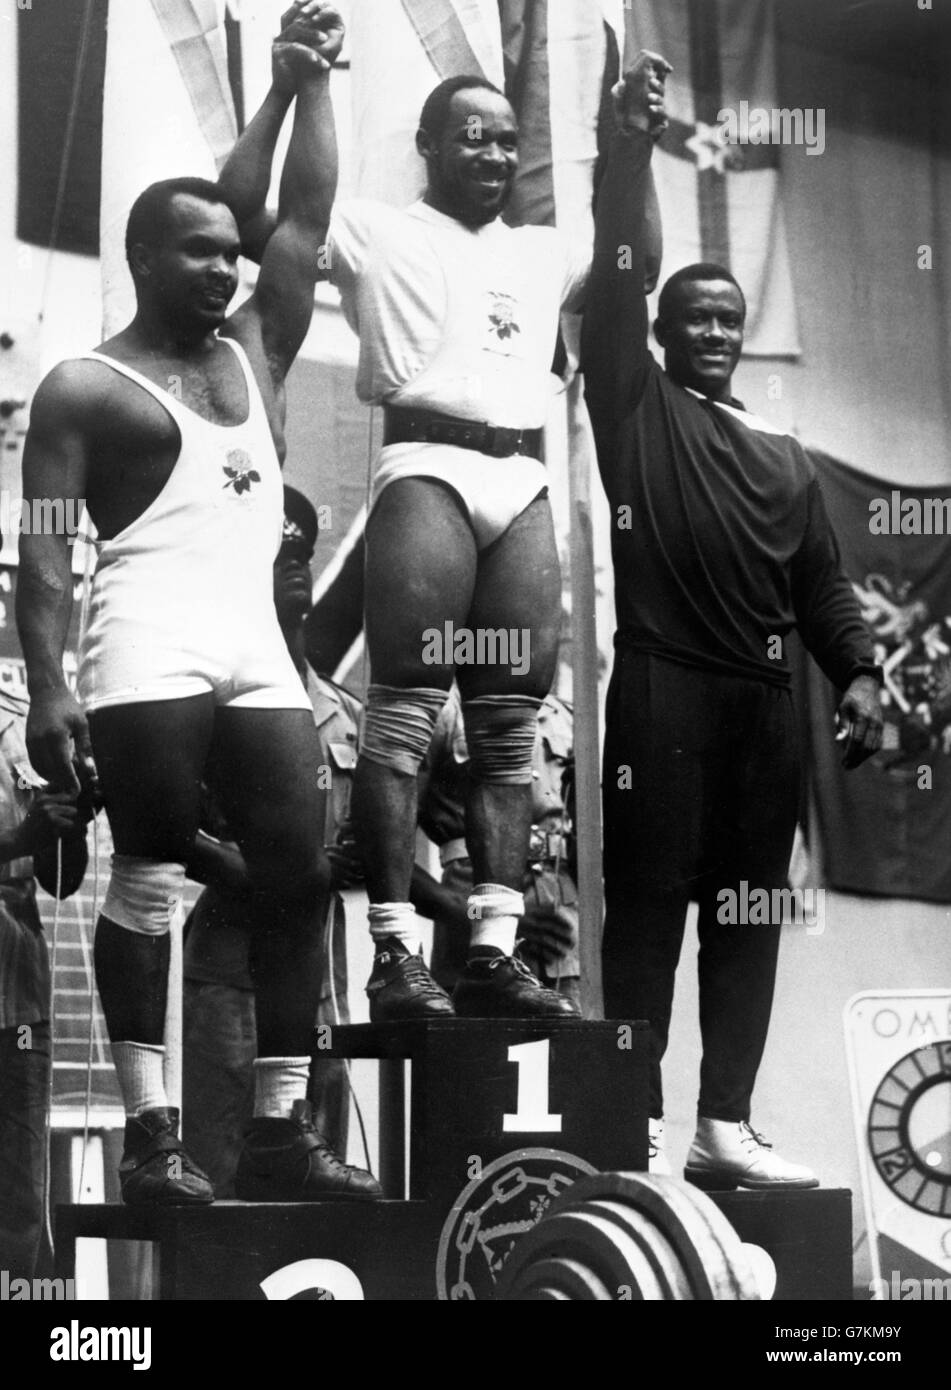 England's Louis Martin claims the gold medal in the mid- heavyweight division of weightlifting. He is flanked by England's G Manners (left) and Jamaica's D Lawson. Stock Photo